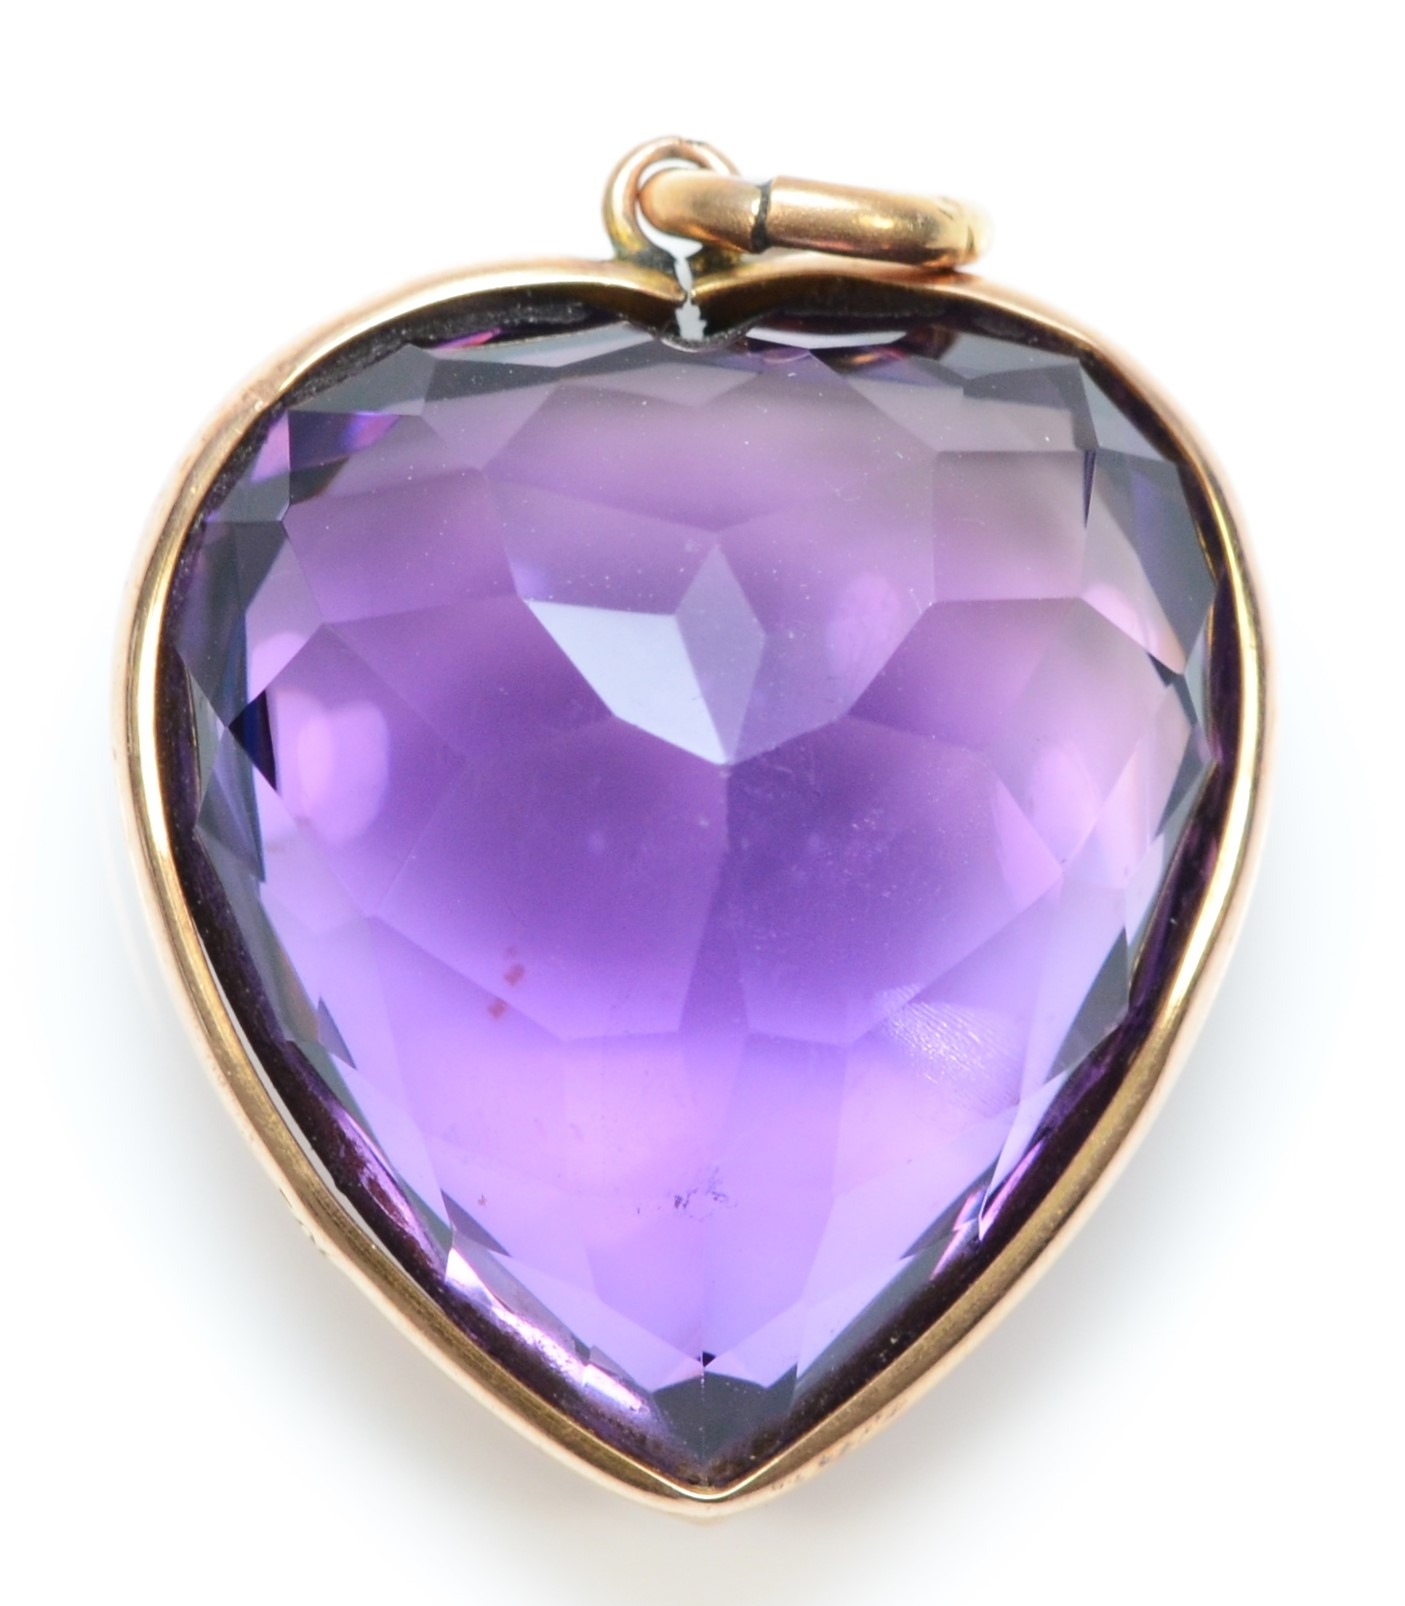 A 9ct gold mounted heart shaped amethyst pendant, 26 x 22mm, 7.5gm, loose in mount. - Image 2 of 2